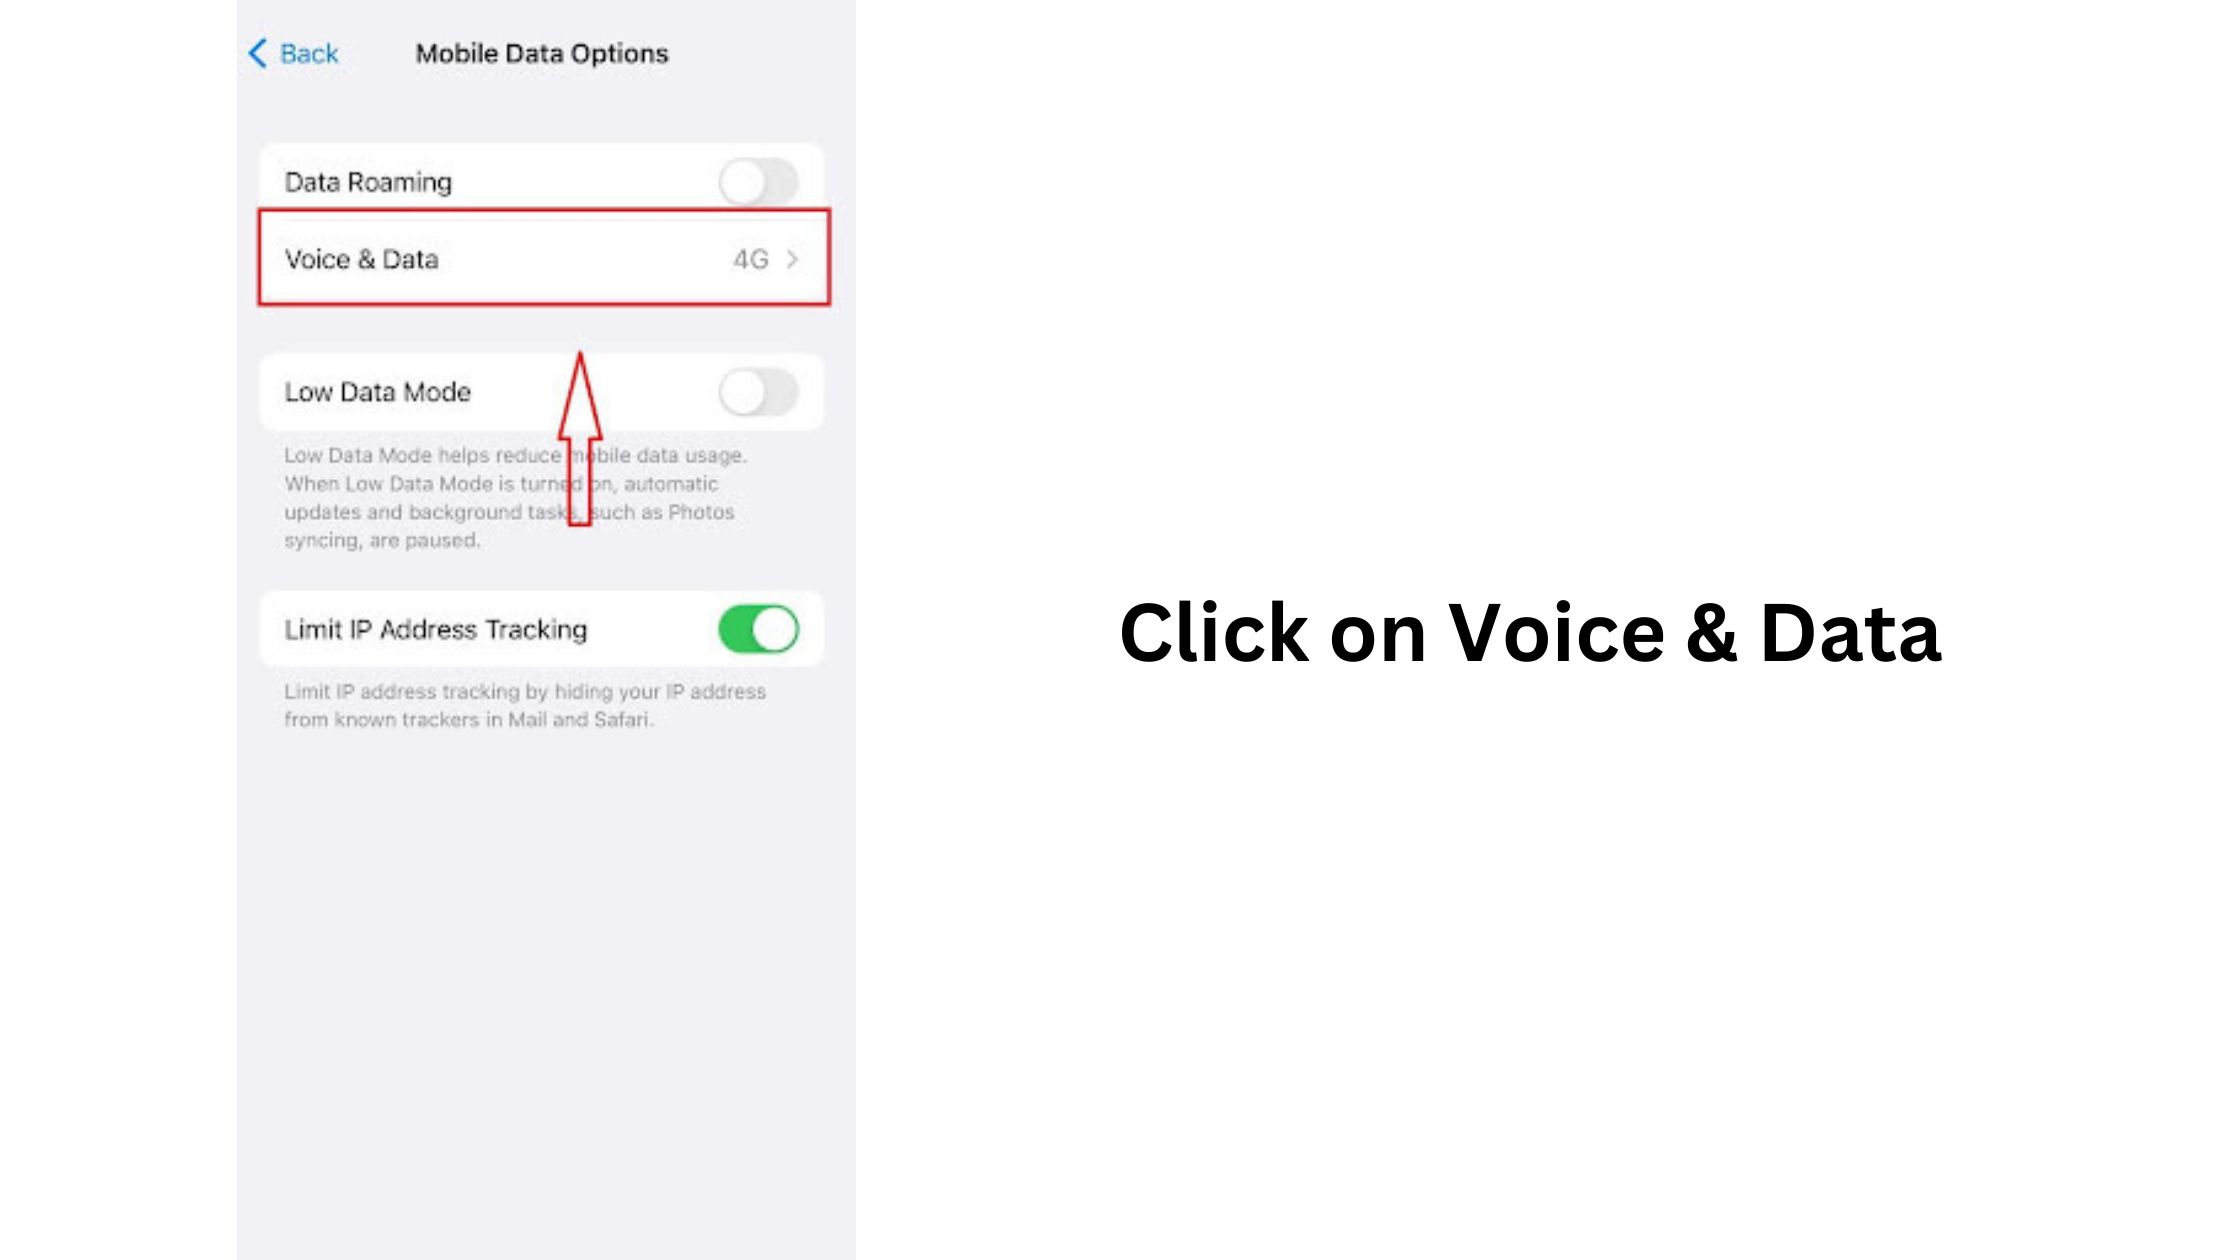 now tap on Voice & Data